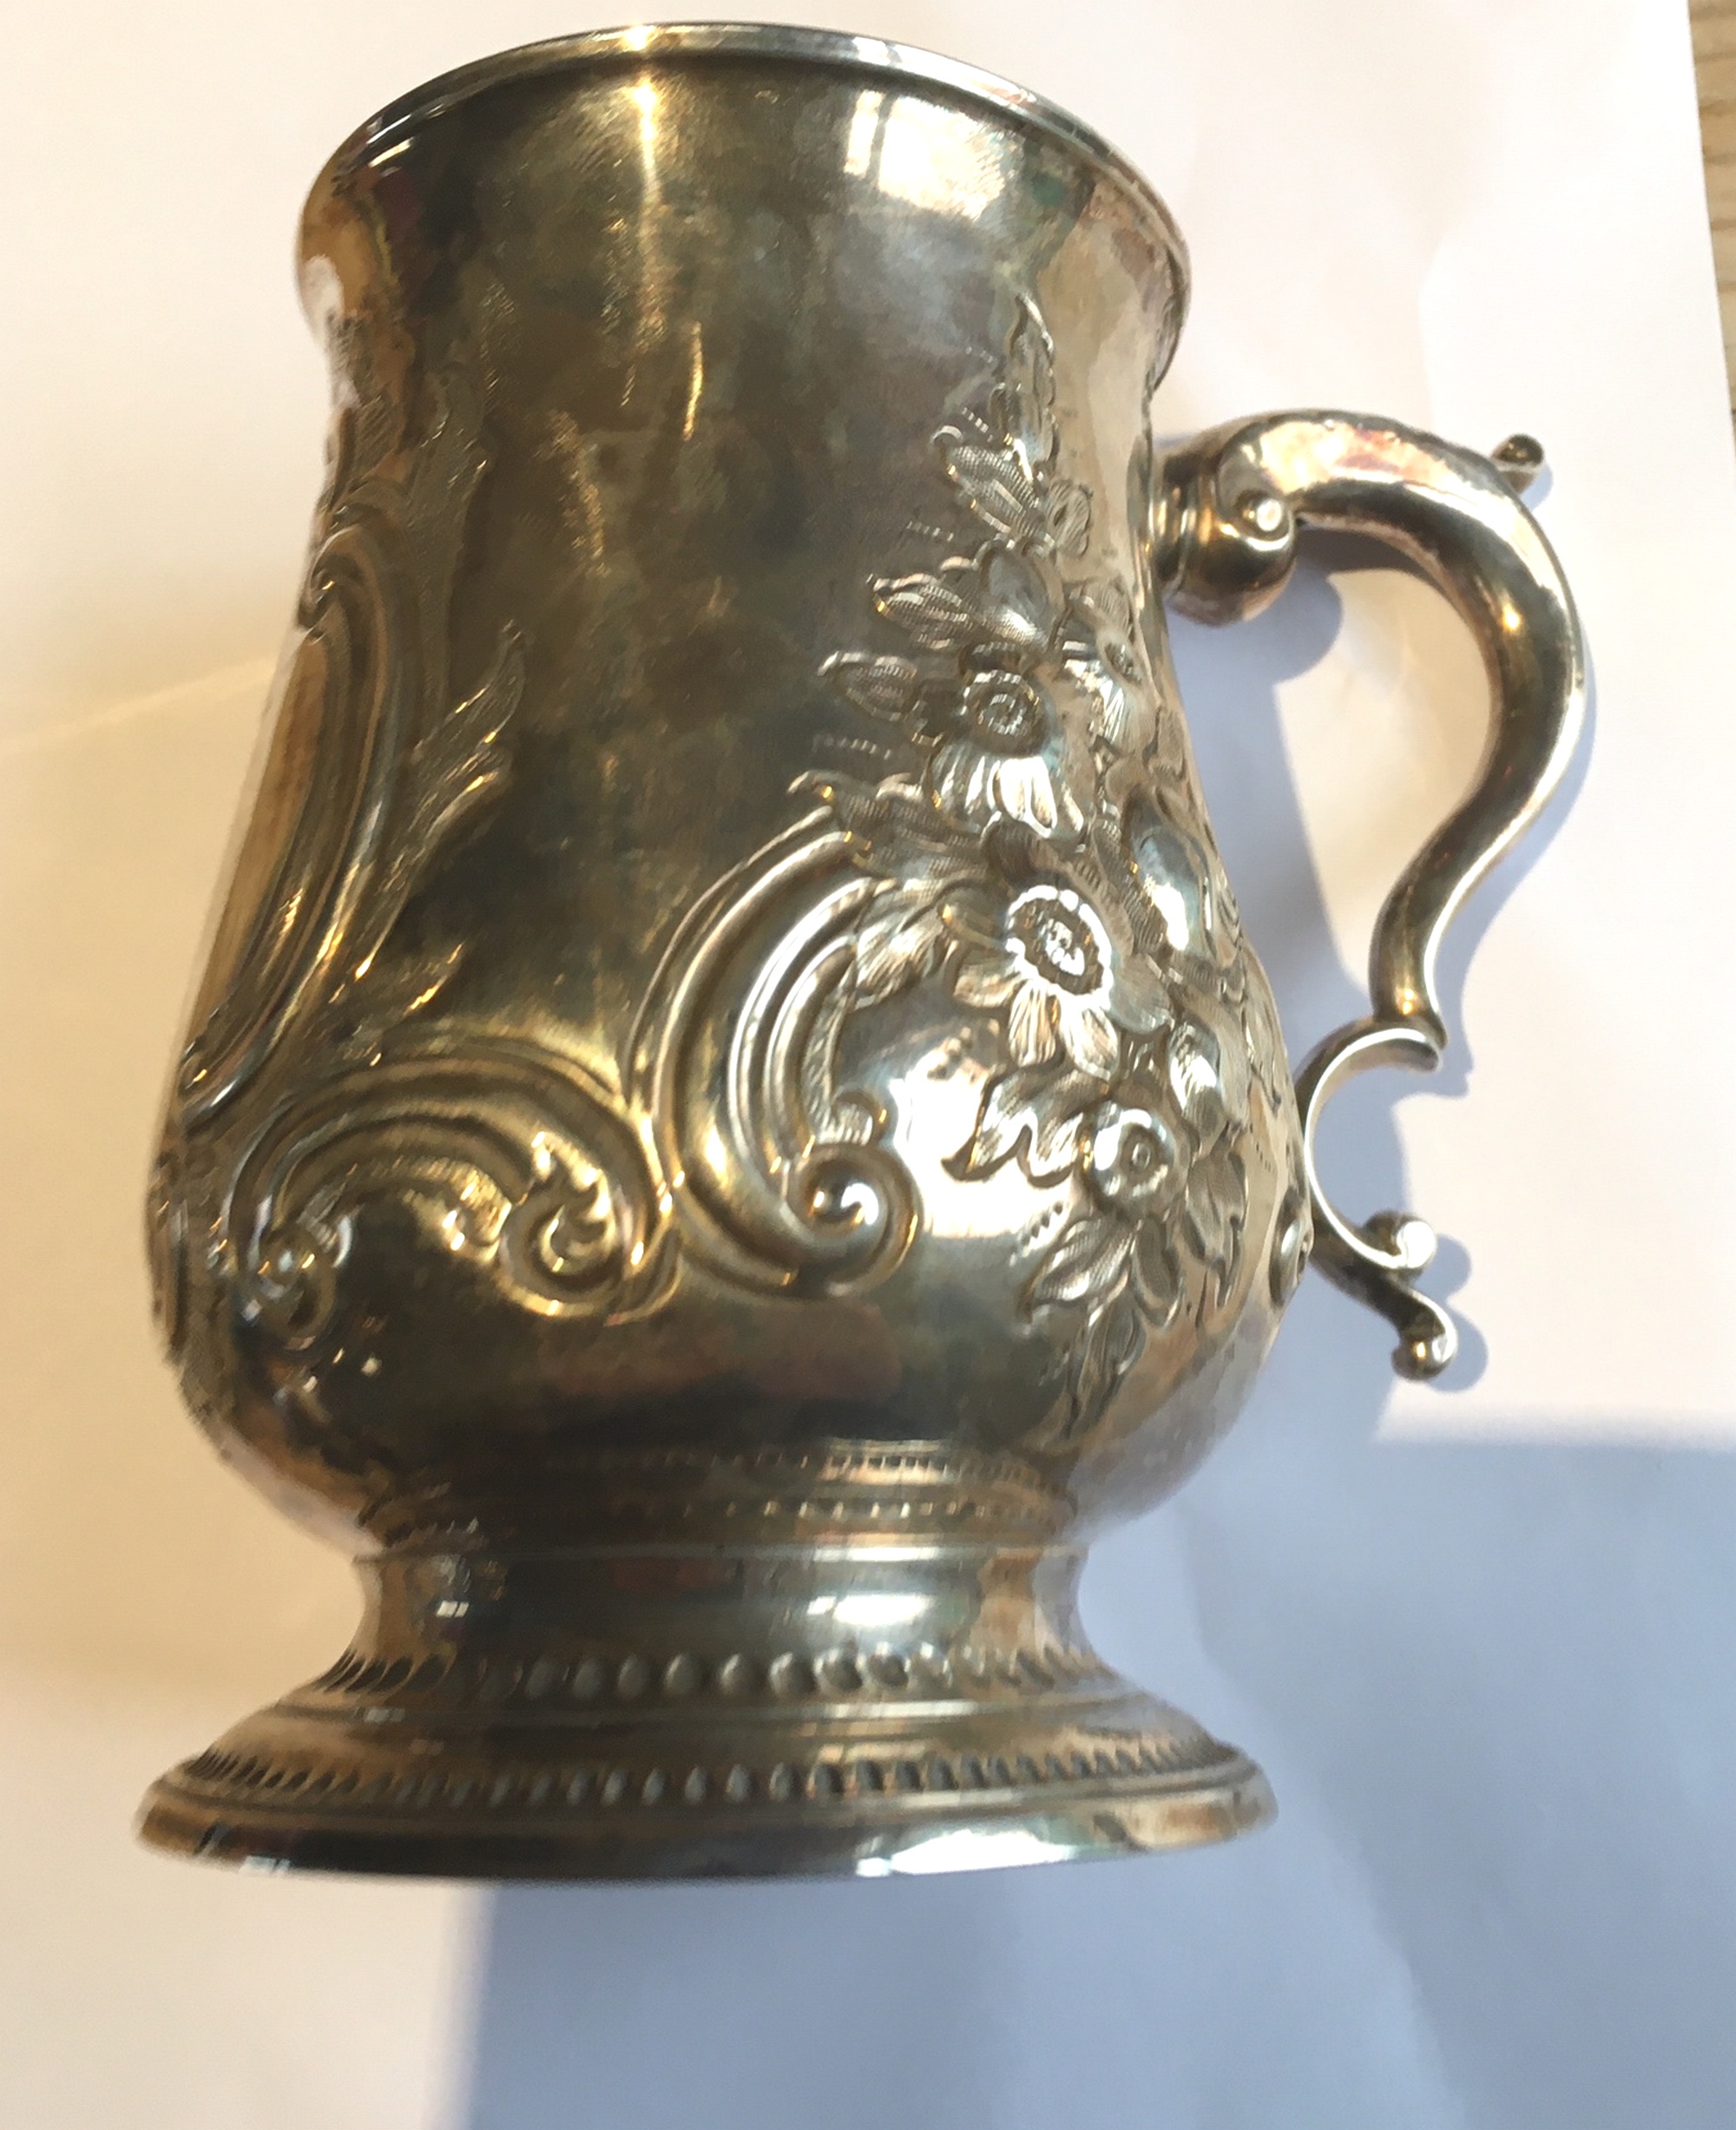 Antique Silver Tankard 5"(12.8cm) tall with London Hallmarks - 331 grams. - Image 3 of 8